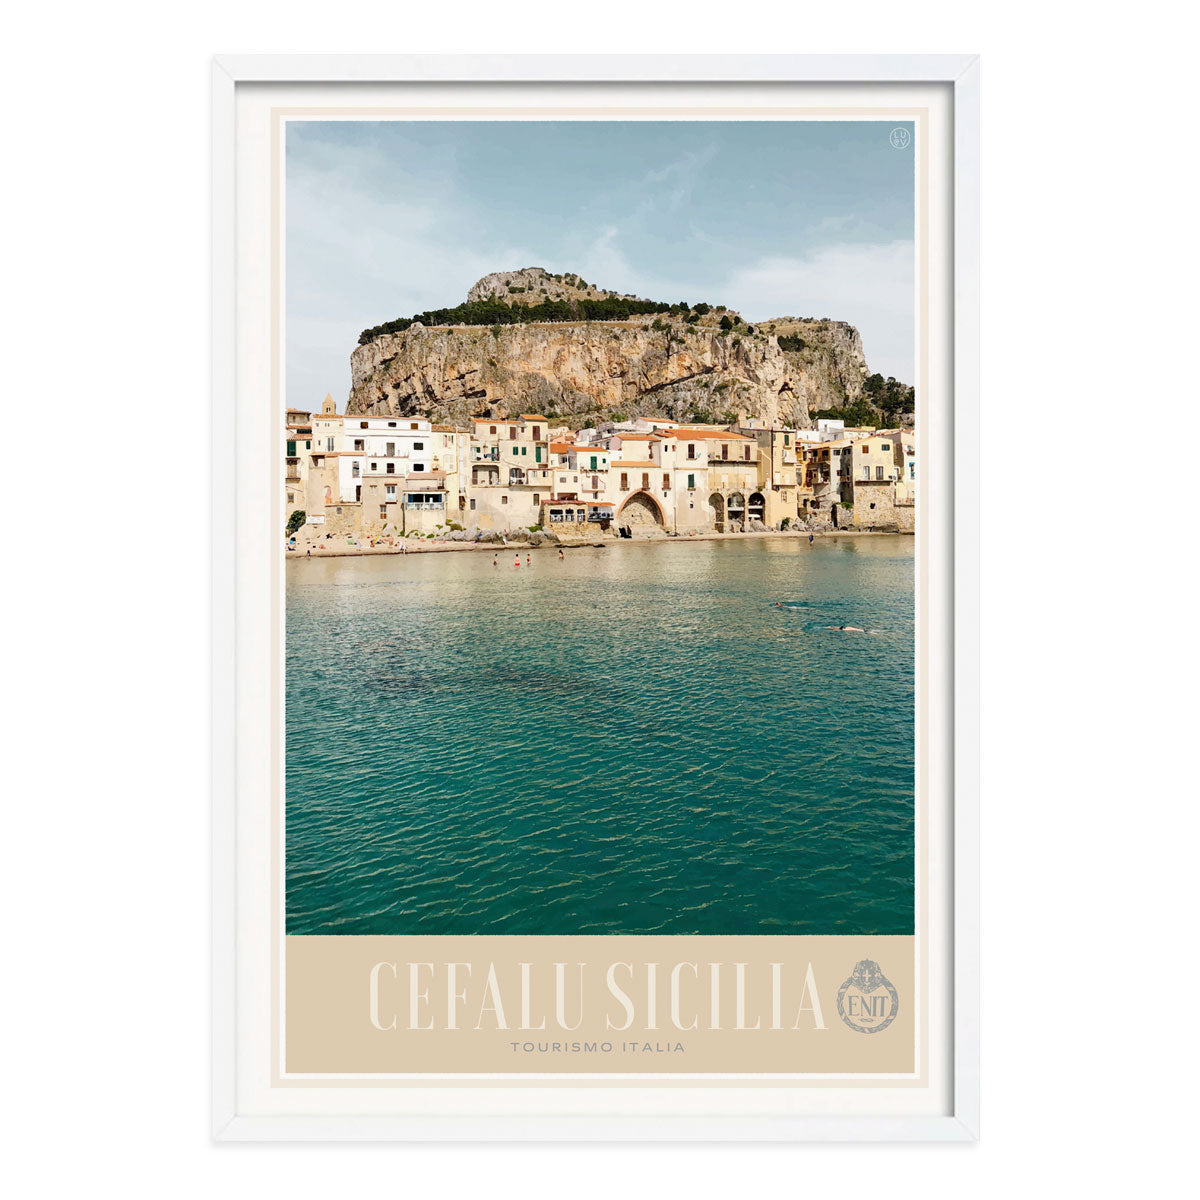 Cefalu Sicily retro vintage poster print in white from Places We Luv